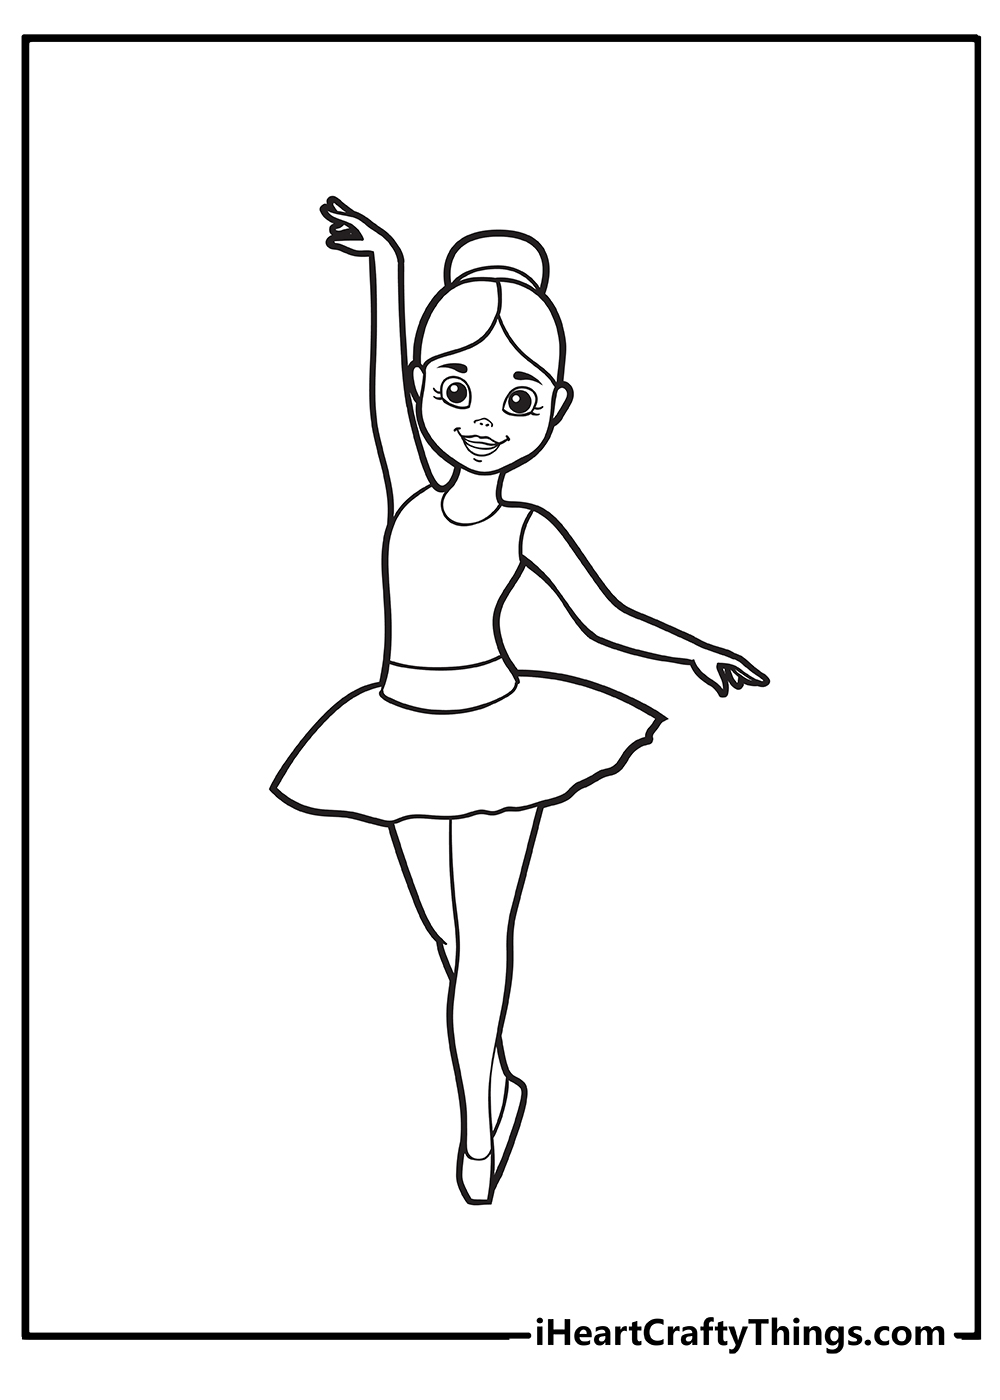 Printable Ballerina Coloring Pages Updated 20